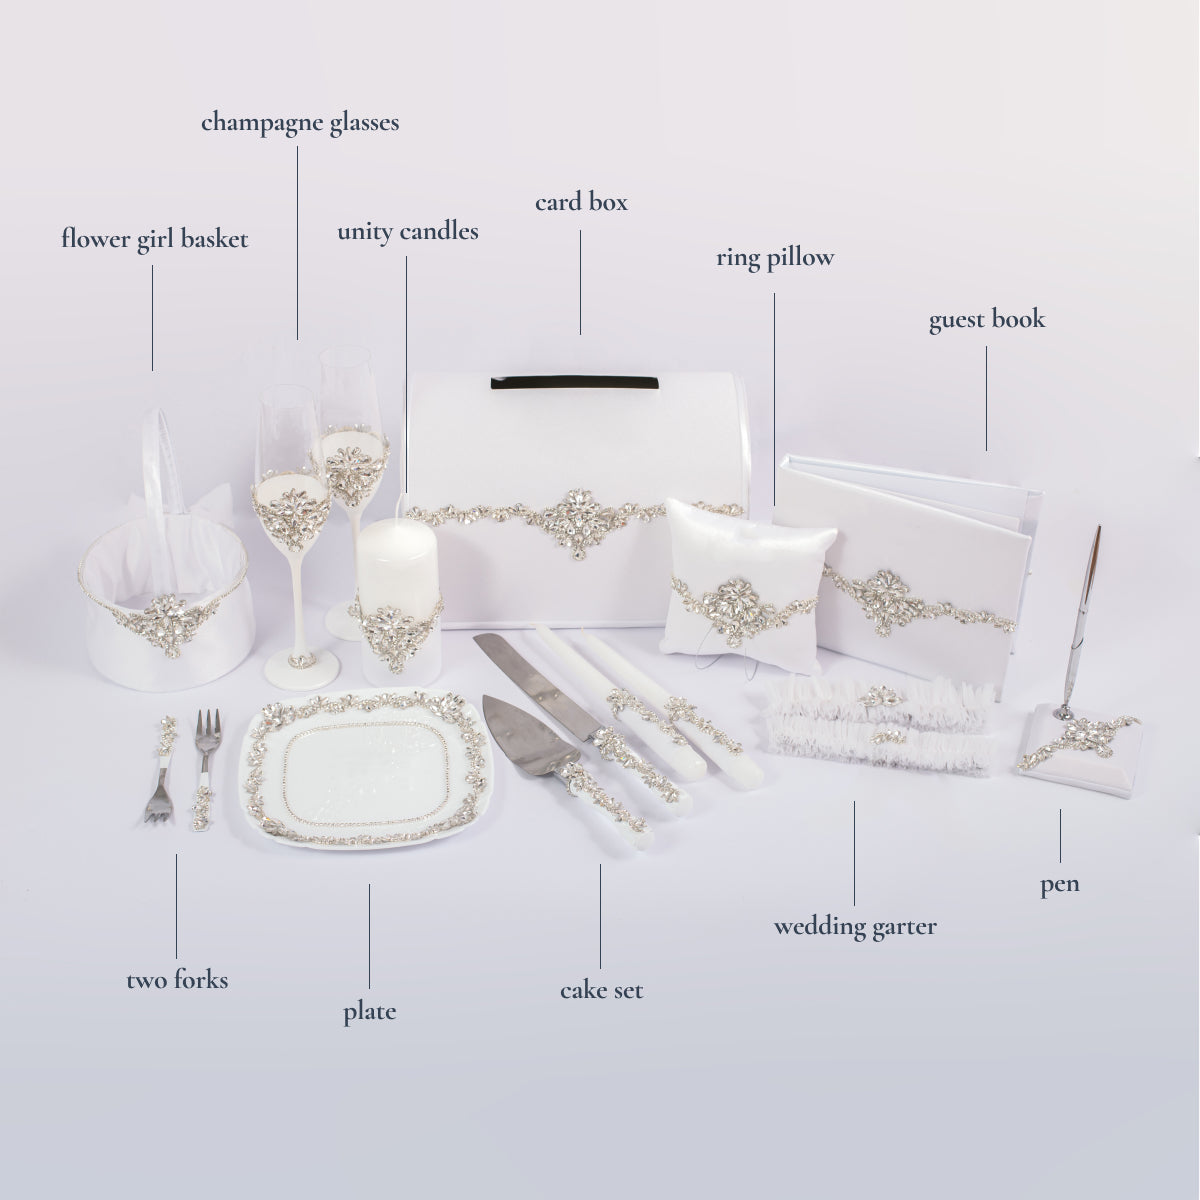 Guest book and pen White Ideal wedding